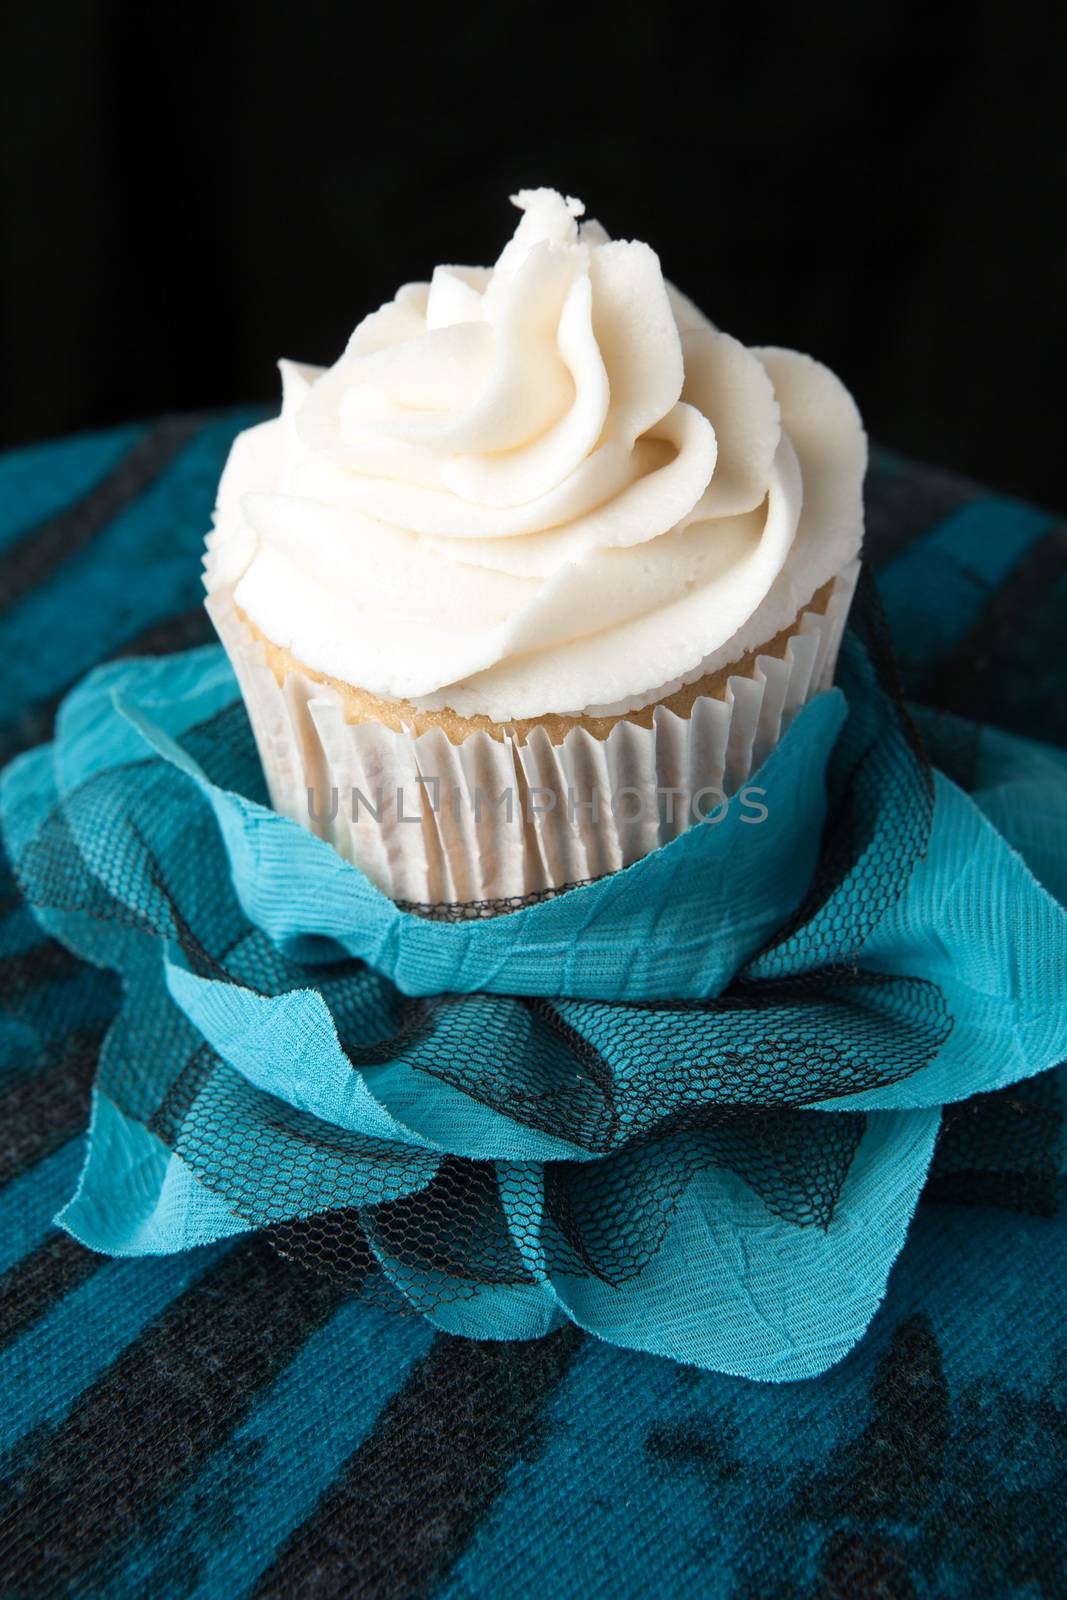 Fancy Vanilla Cupcake by graficallyminded